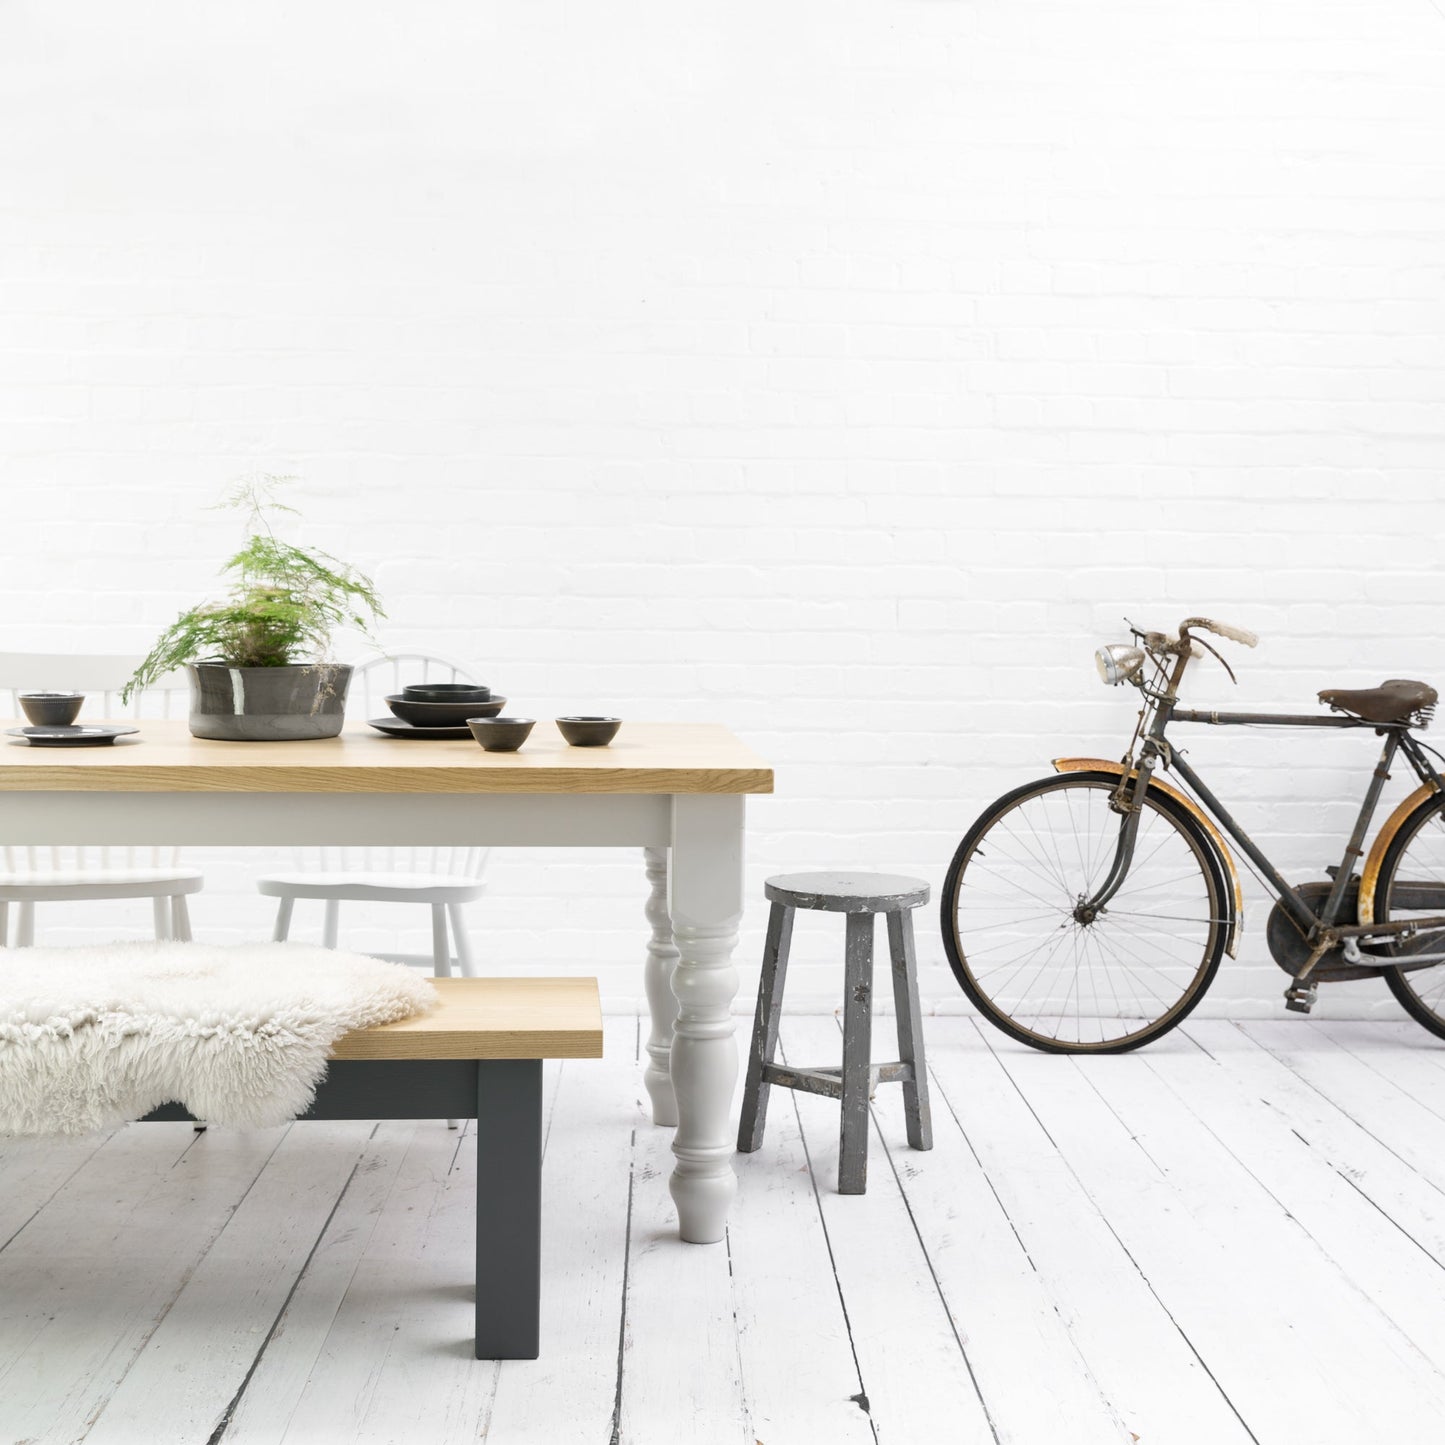 A Farmhouse Rustic Oak Dining Table with a bicycle parked in front, ideal for home furniture and interior decor.